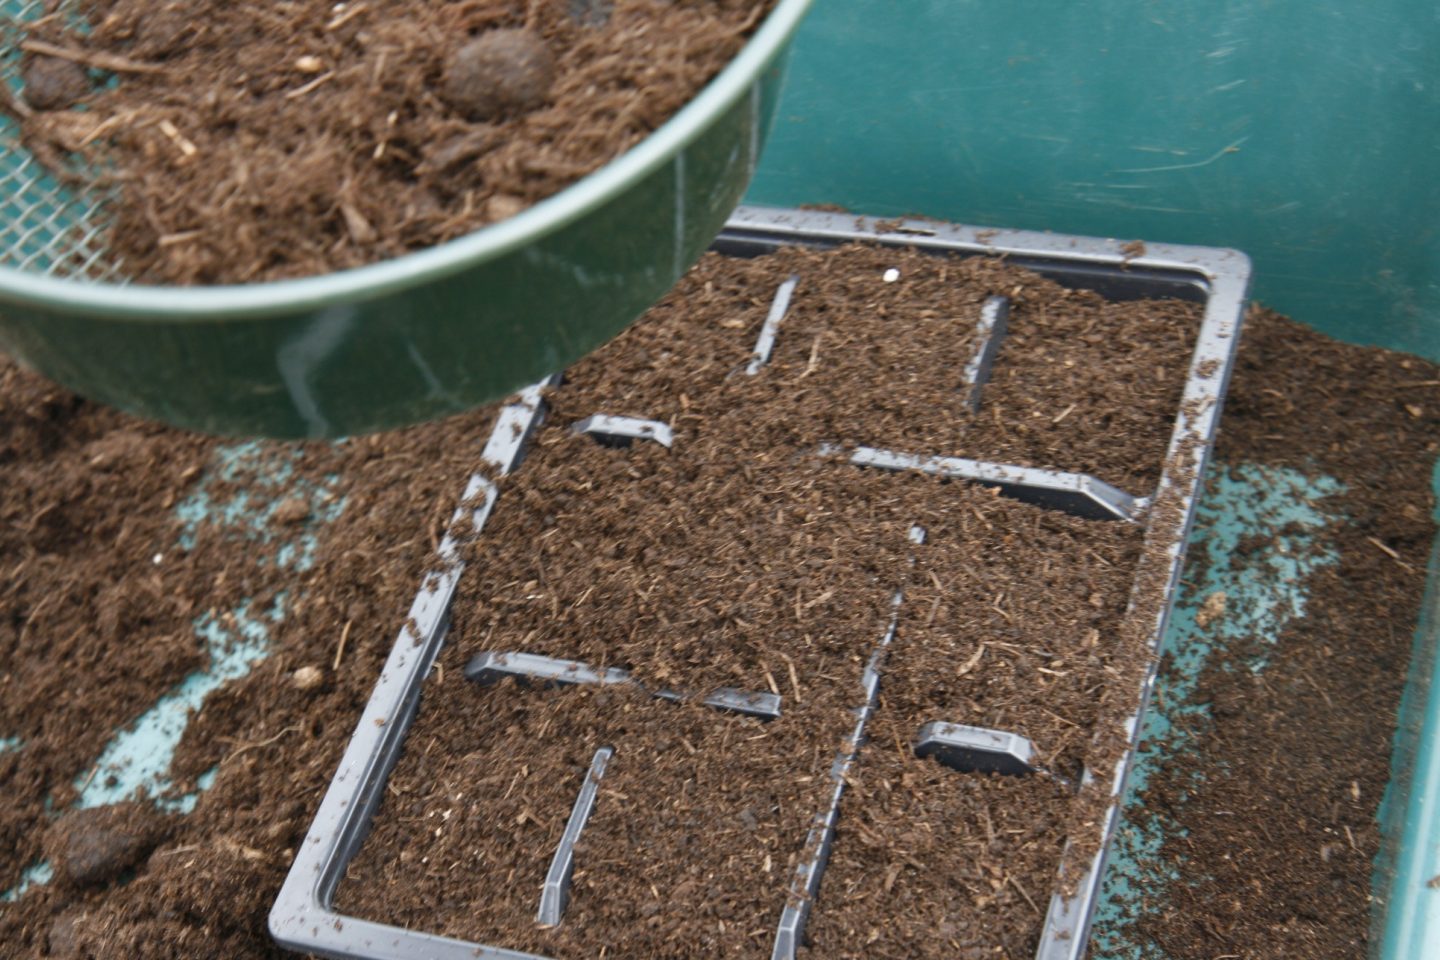 Sieve being used to sprinkle compost over seed tray